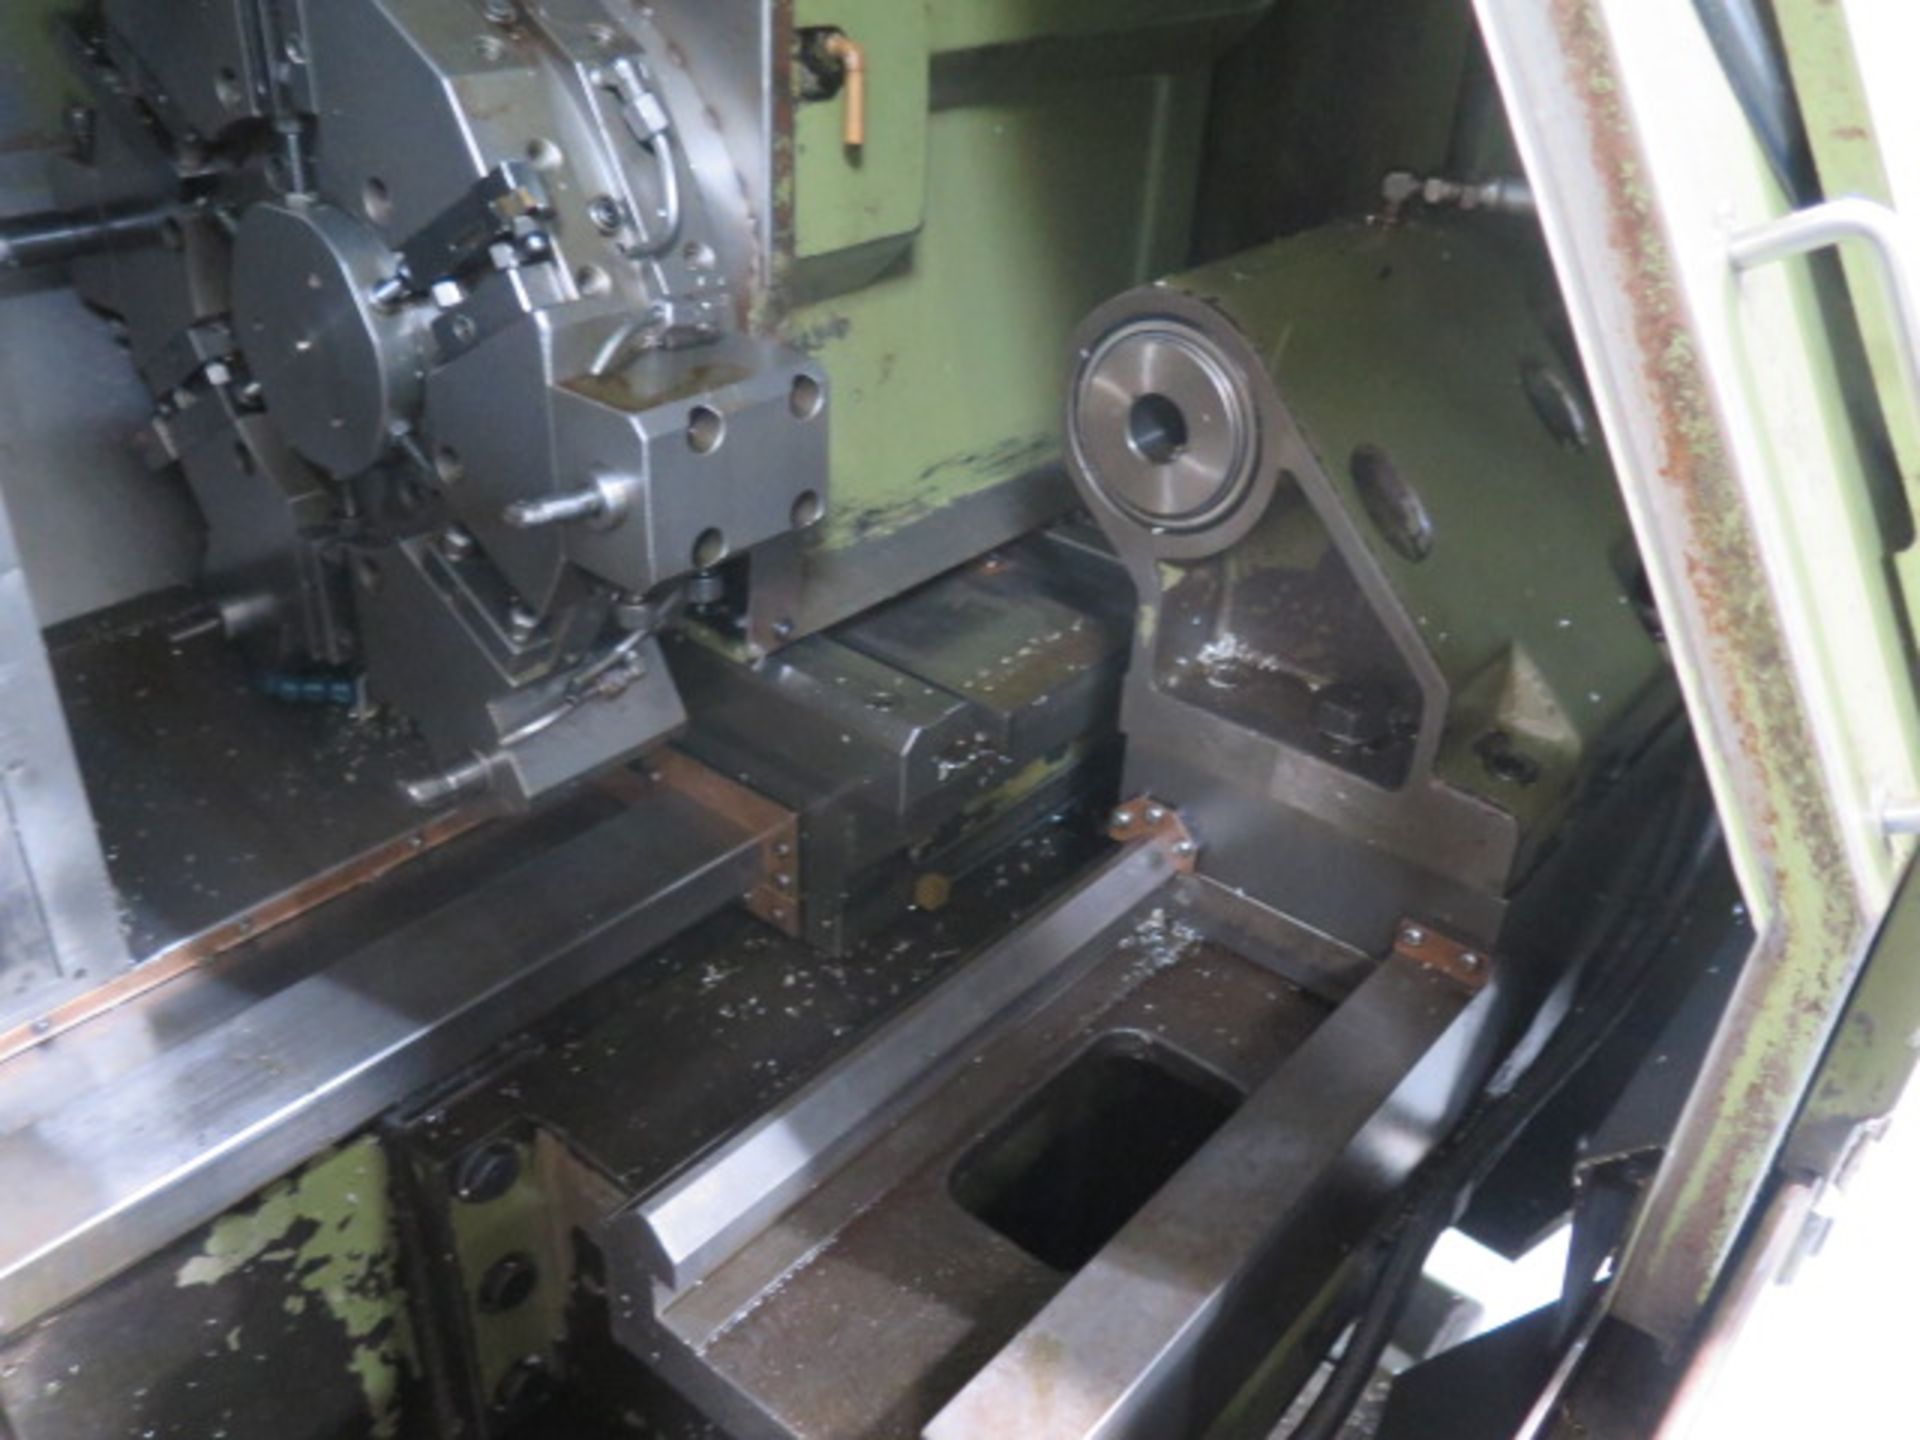 Hitachi Seiki 3NE-300 CNC Turning Center w/ Fanuc System 5T Controls, 12-Station Turret, SOLD AS IS - Image 7 of 10